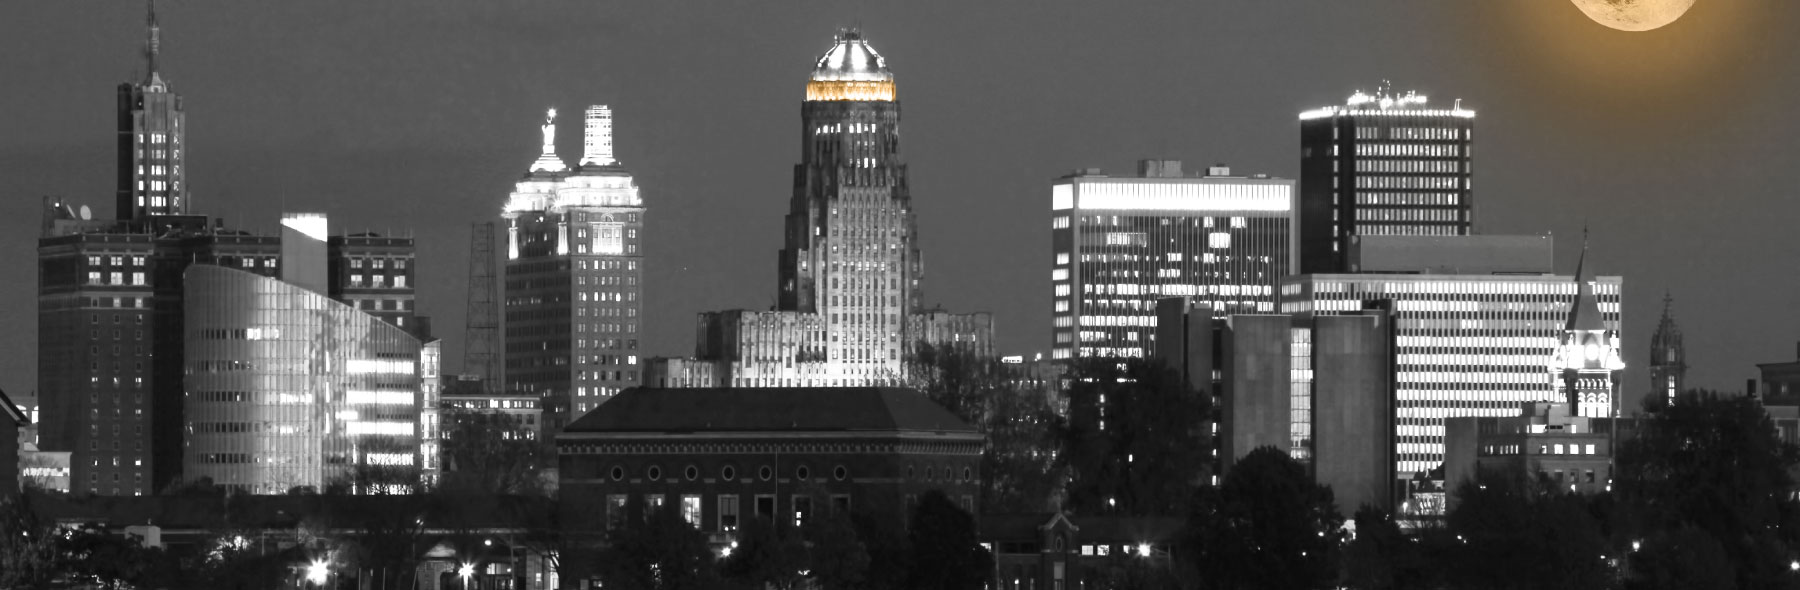 About Us Header Image of Buffalo Skyline with moon